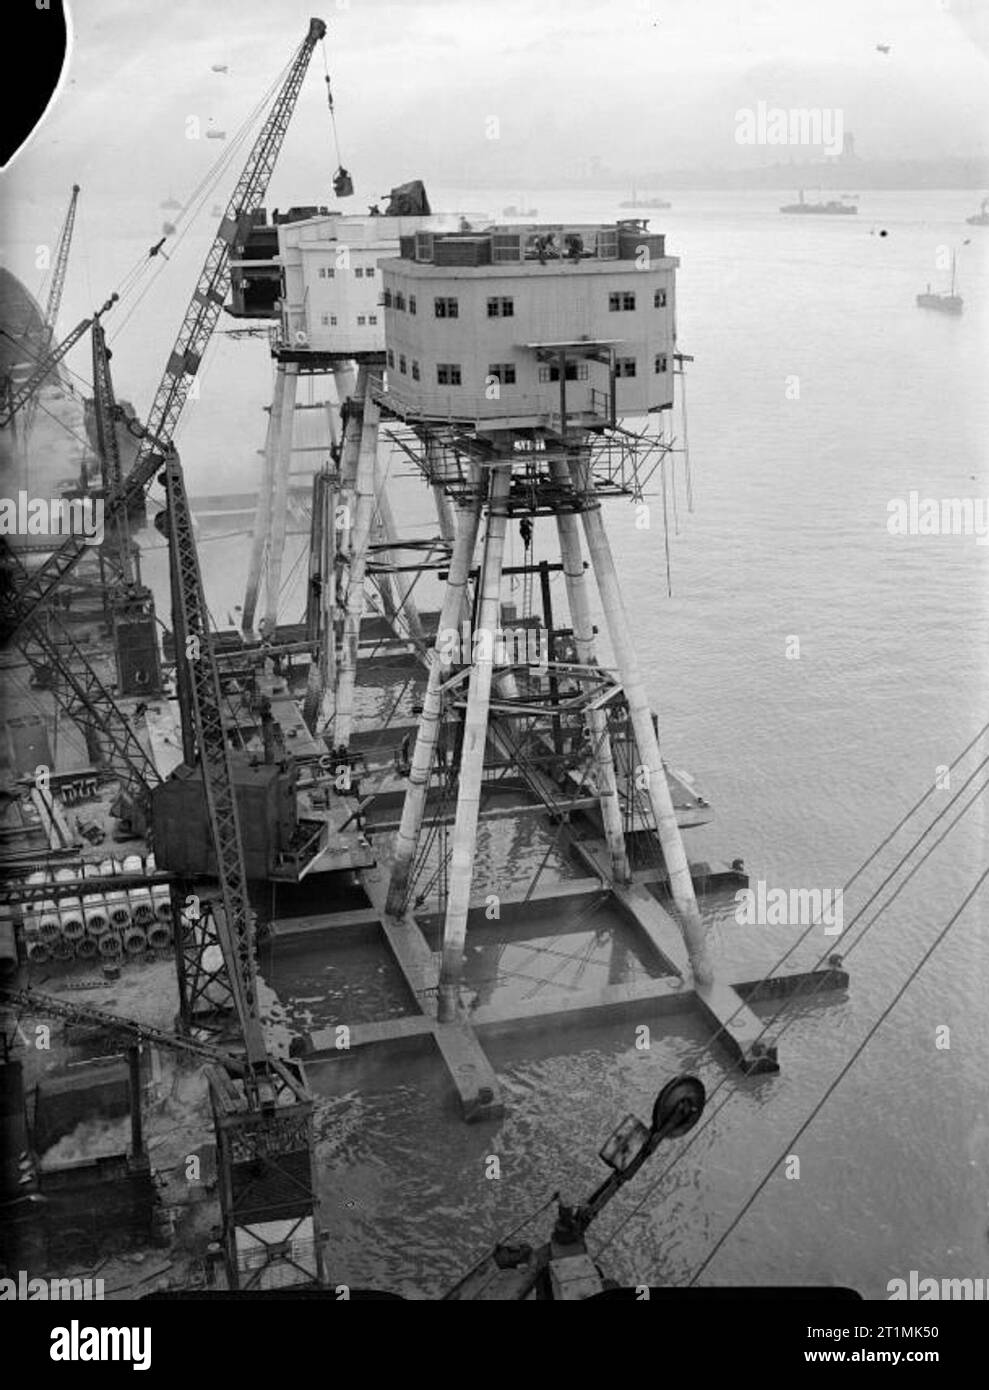 The Royal Navy during the Second World War 120 foot Maunsell anti-aircraft forts for use in the Mersey Estuary under construction at Bromborough Dock. Here they are well on the way to completion with the accommodation block fitted to the four long legs that will rest on the sea bed. Stock Photo